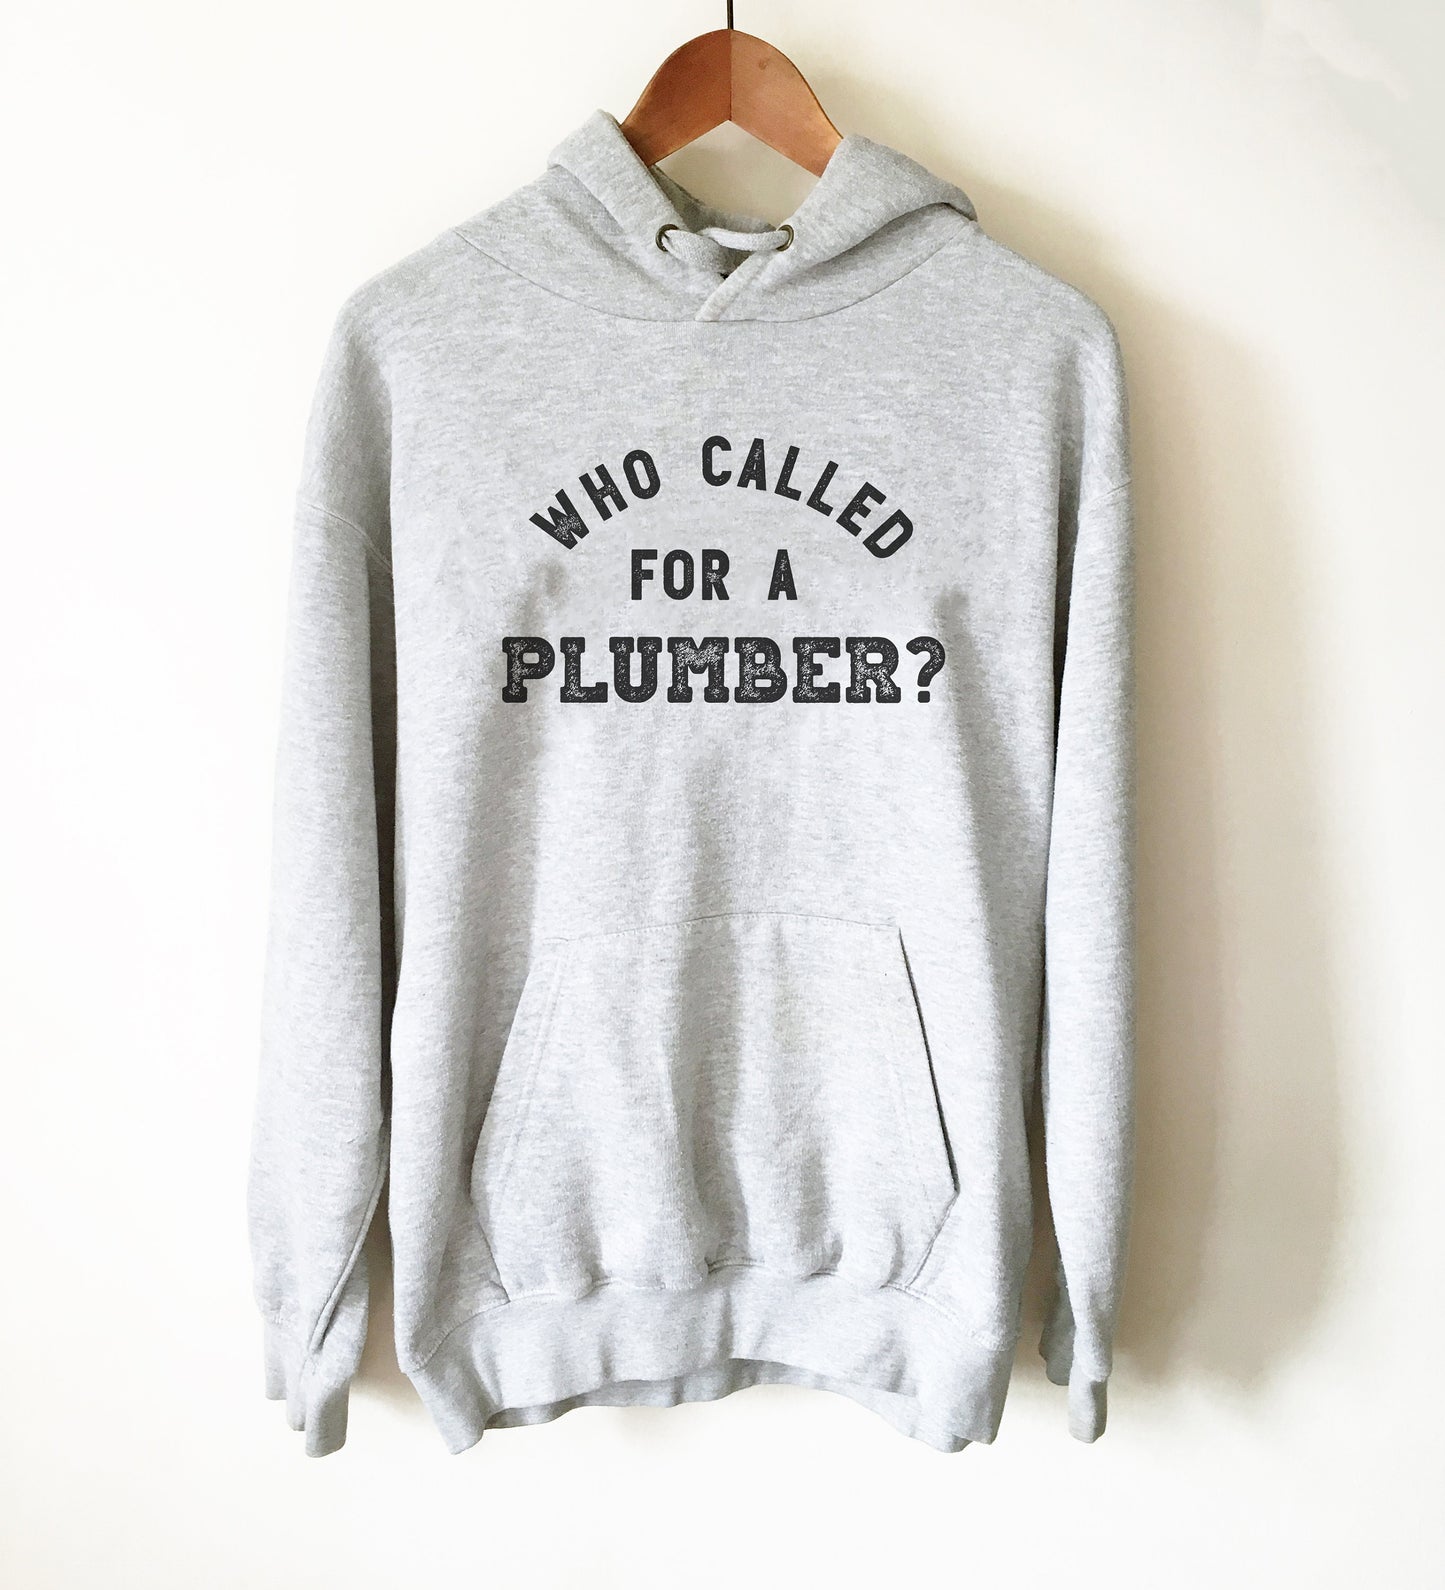 Who Called For A Plumber? Hoodie - Plumber, Plumber T-Shirt, Plumbing Shirt, Plumber Gift, Fathers Day Gift, Gift For Dad